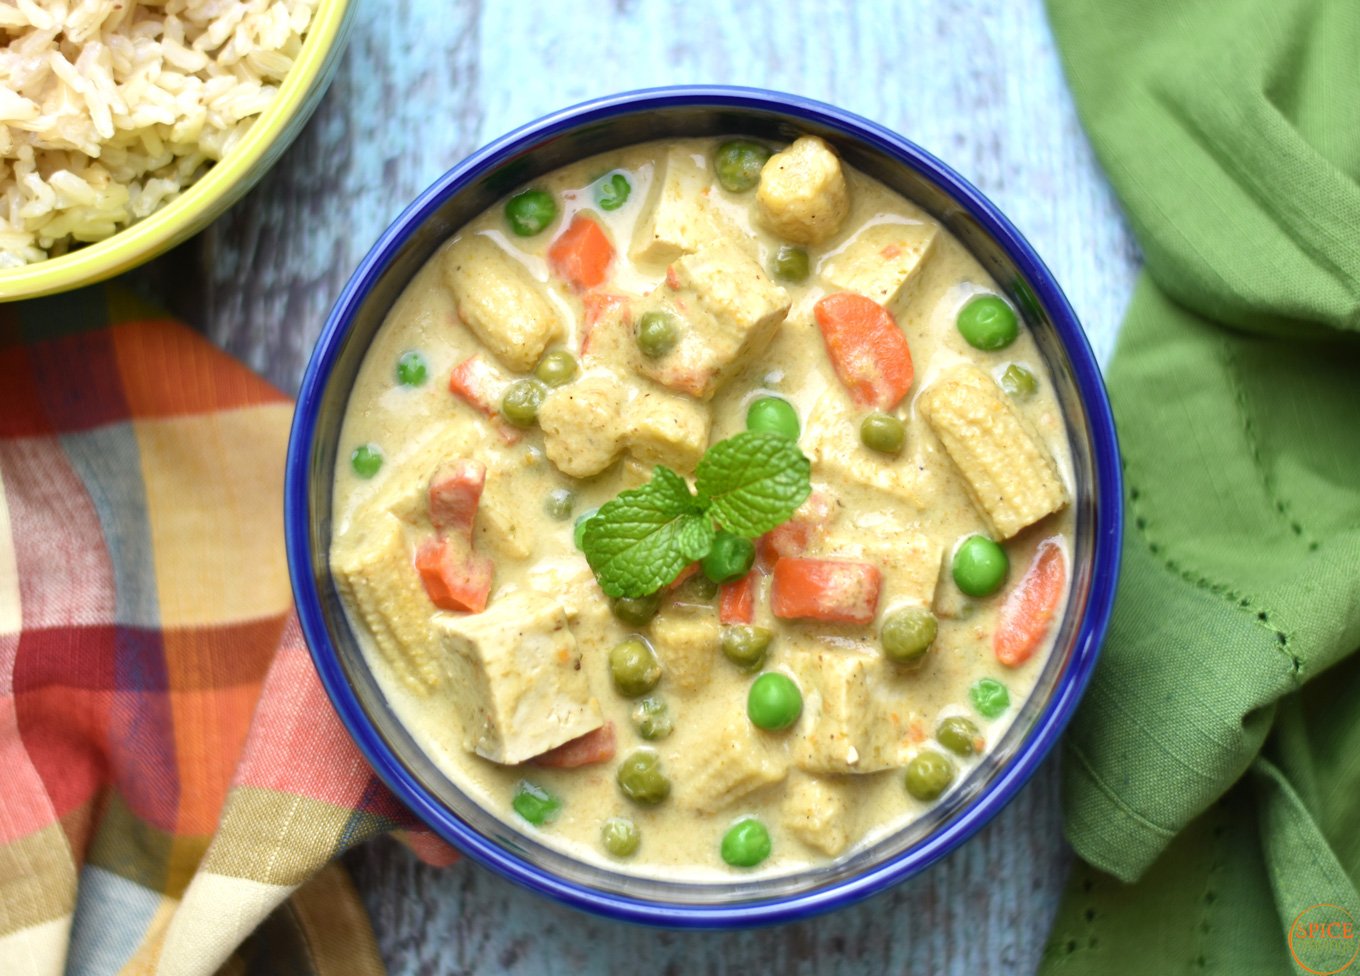 Green curry with tofu and vegetables garnished with mint leaves